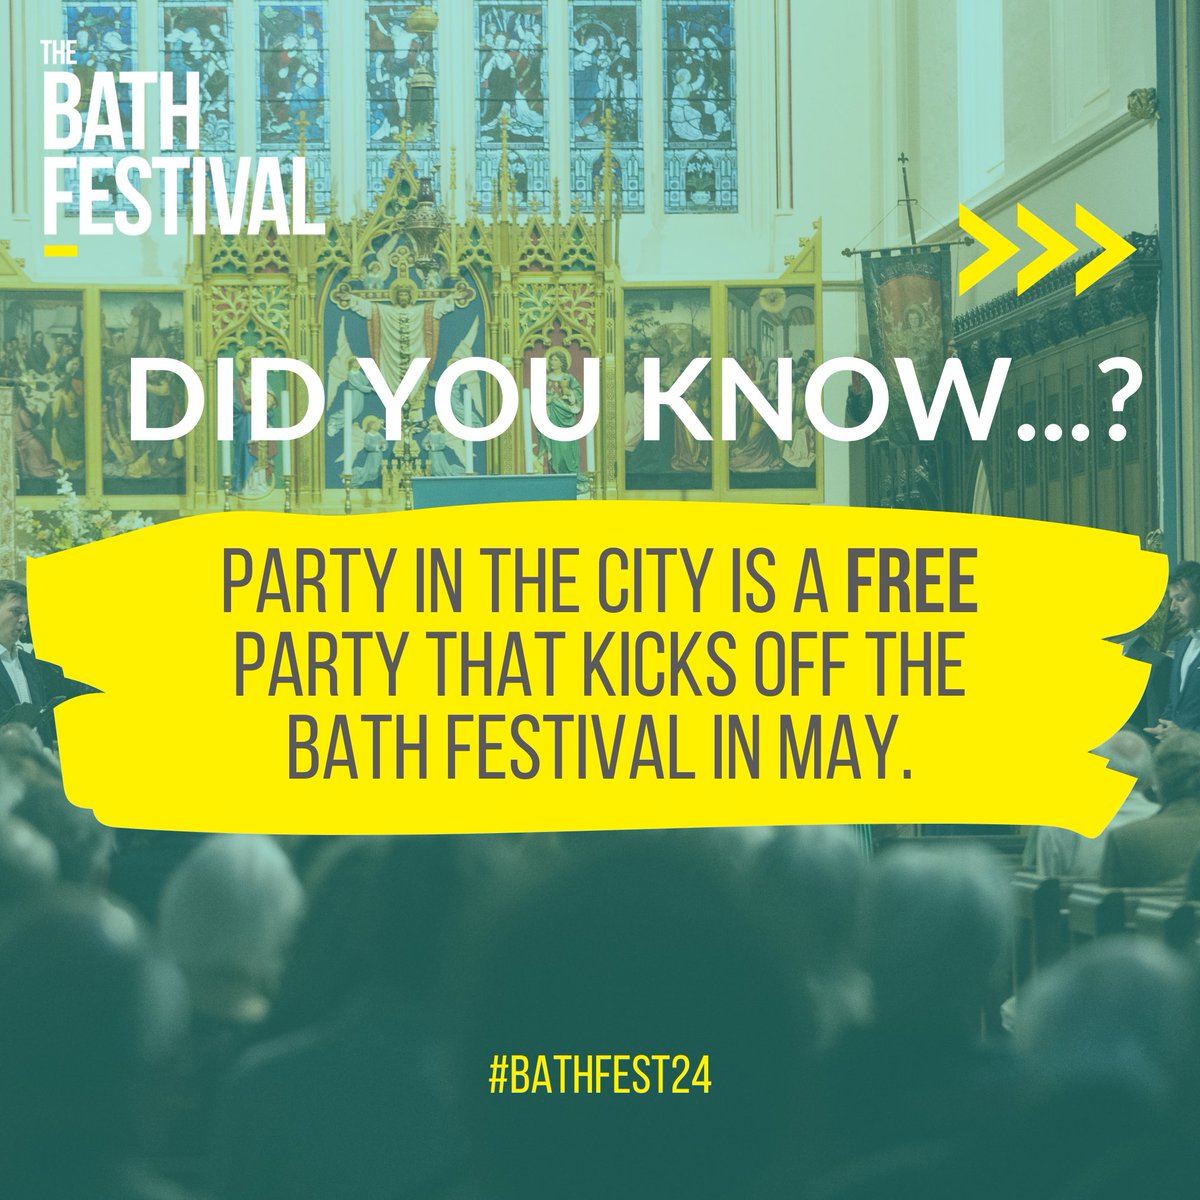 3 things you might not know about #BathFestival 💡 1️⃣ Explore Bath's historic venues at The Festival 2️⃣ Events for everyone! 3️⃣ Party in the City - FREE party, 17 May What's not to love about that?! More info coming soon...#BathFest24 @bathnes @wessexwater @totalbath @VisitBath